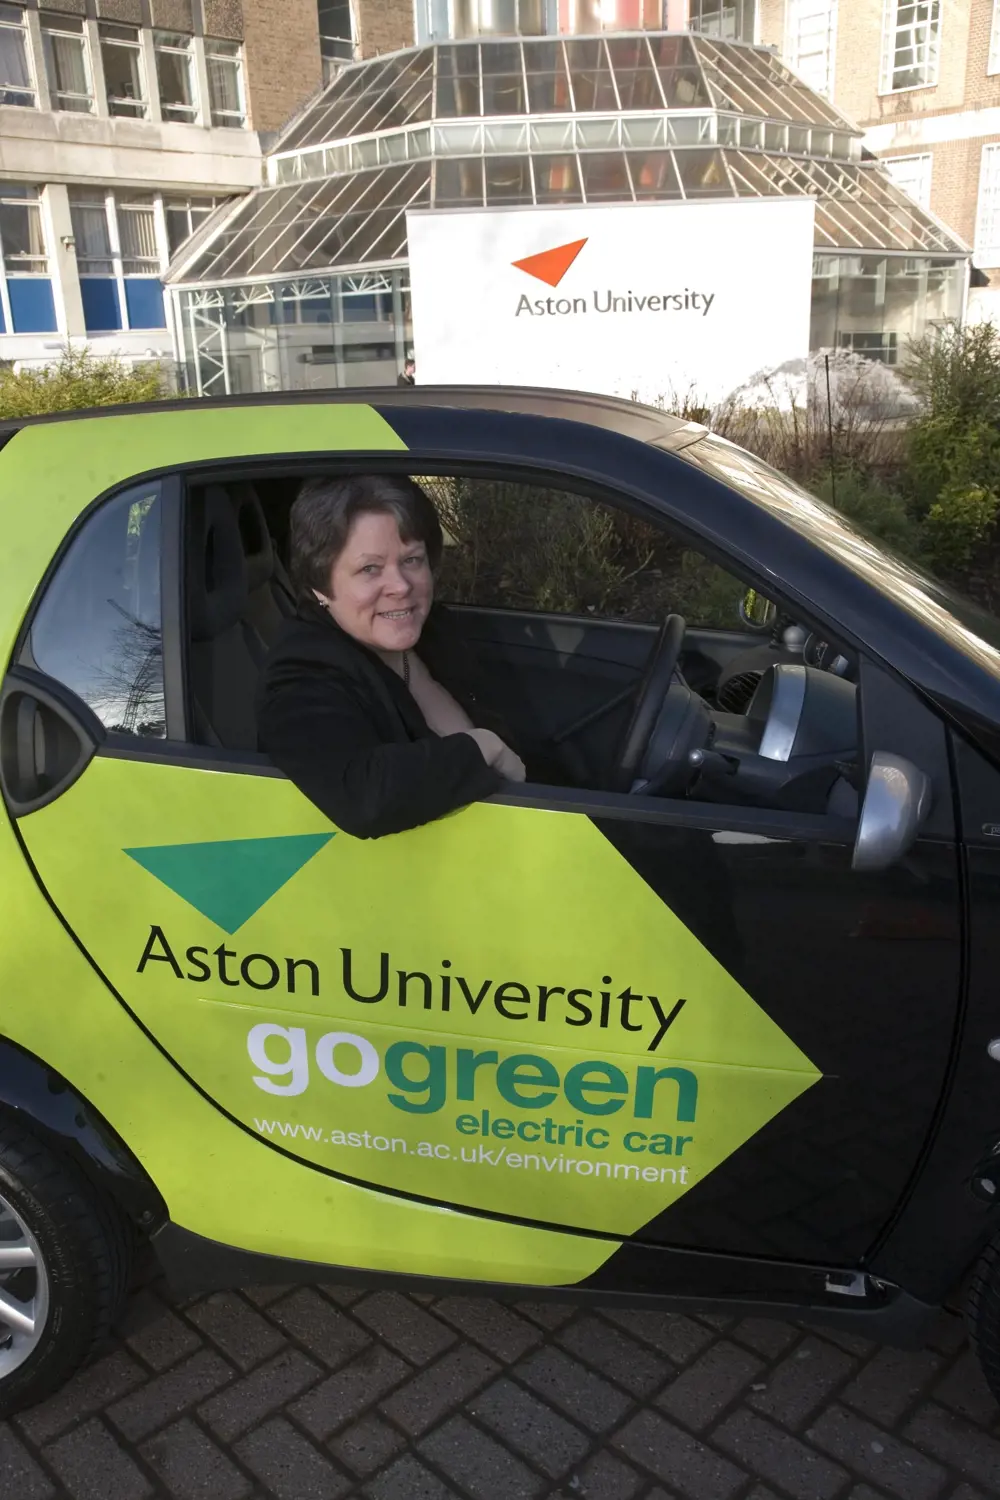 Baroness Brown inside a SMART electric car, that has advertising for 'Aston University' and 'go green'.